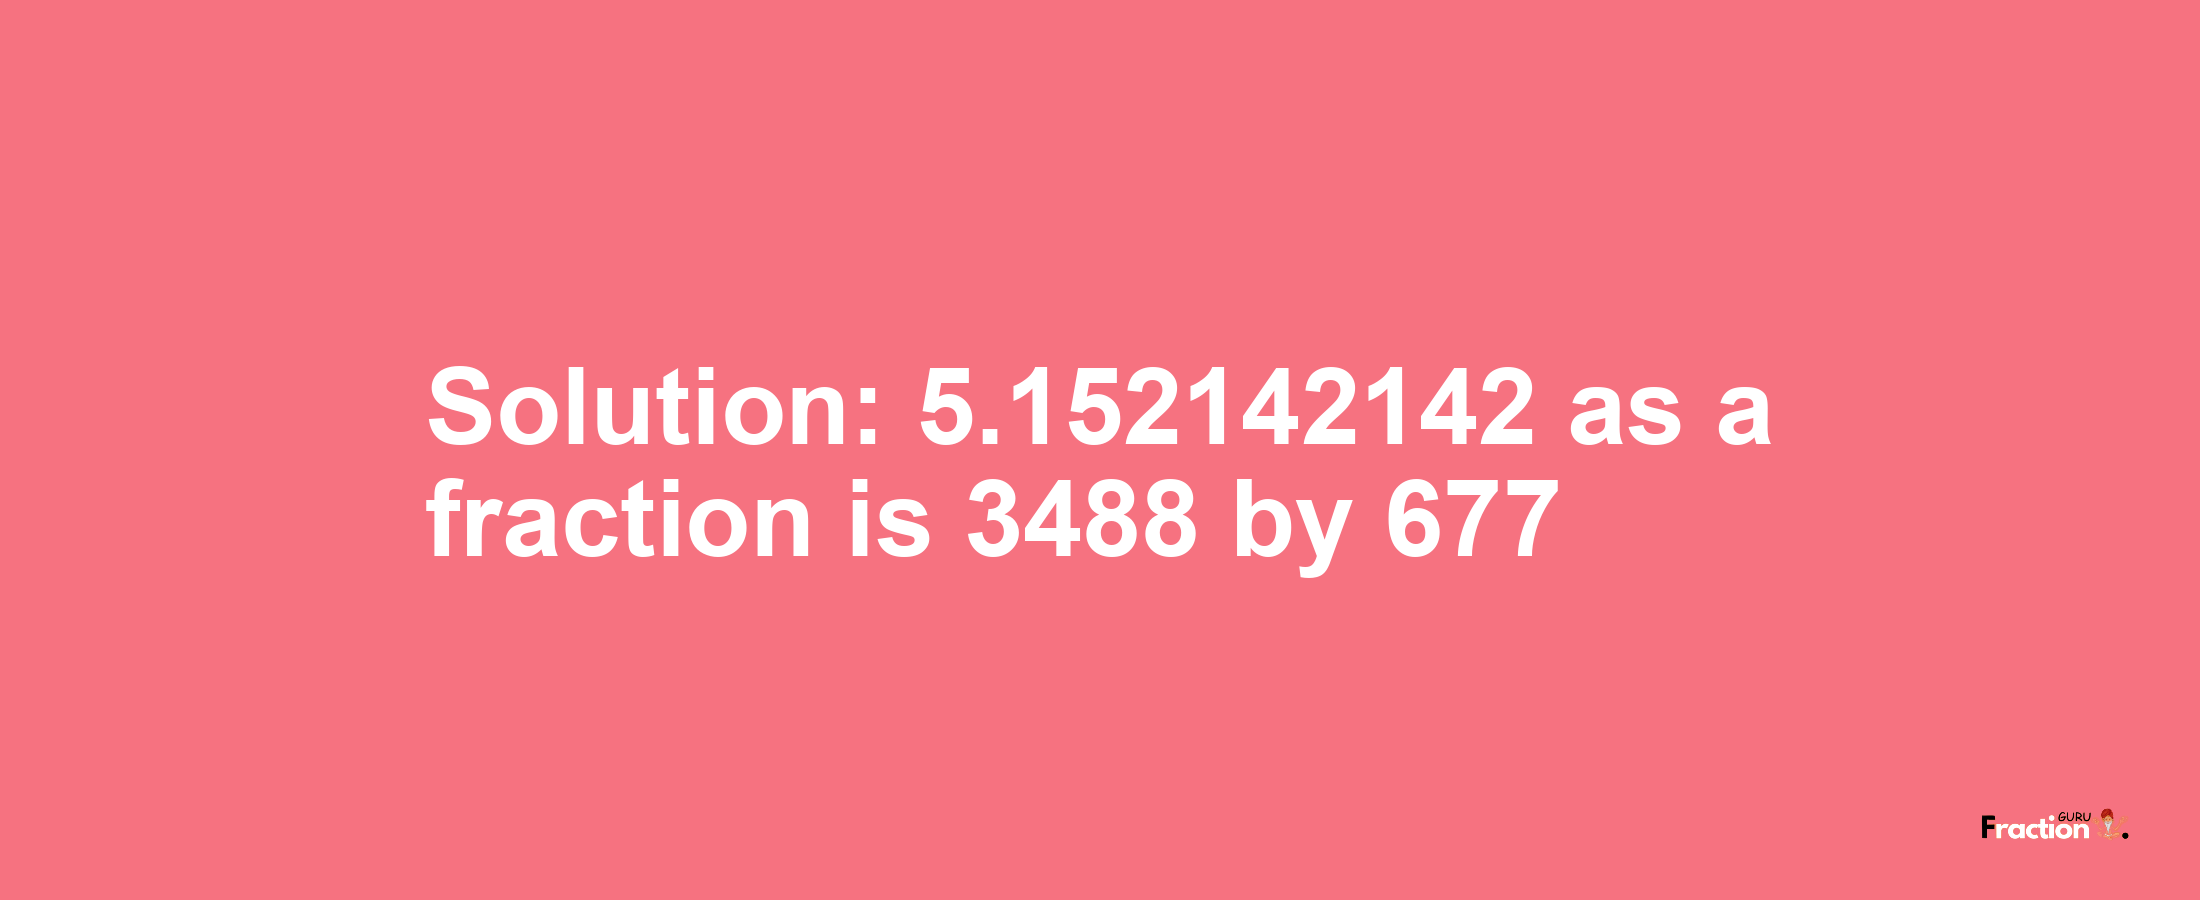 Solution:5.152142142 as a fraction is 3488/677